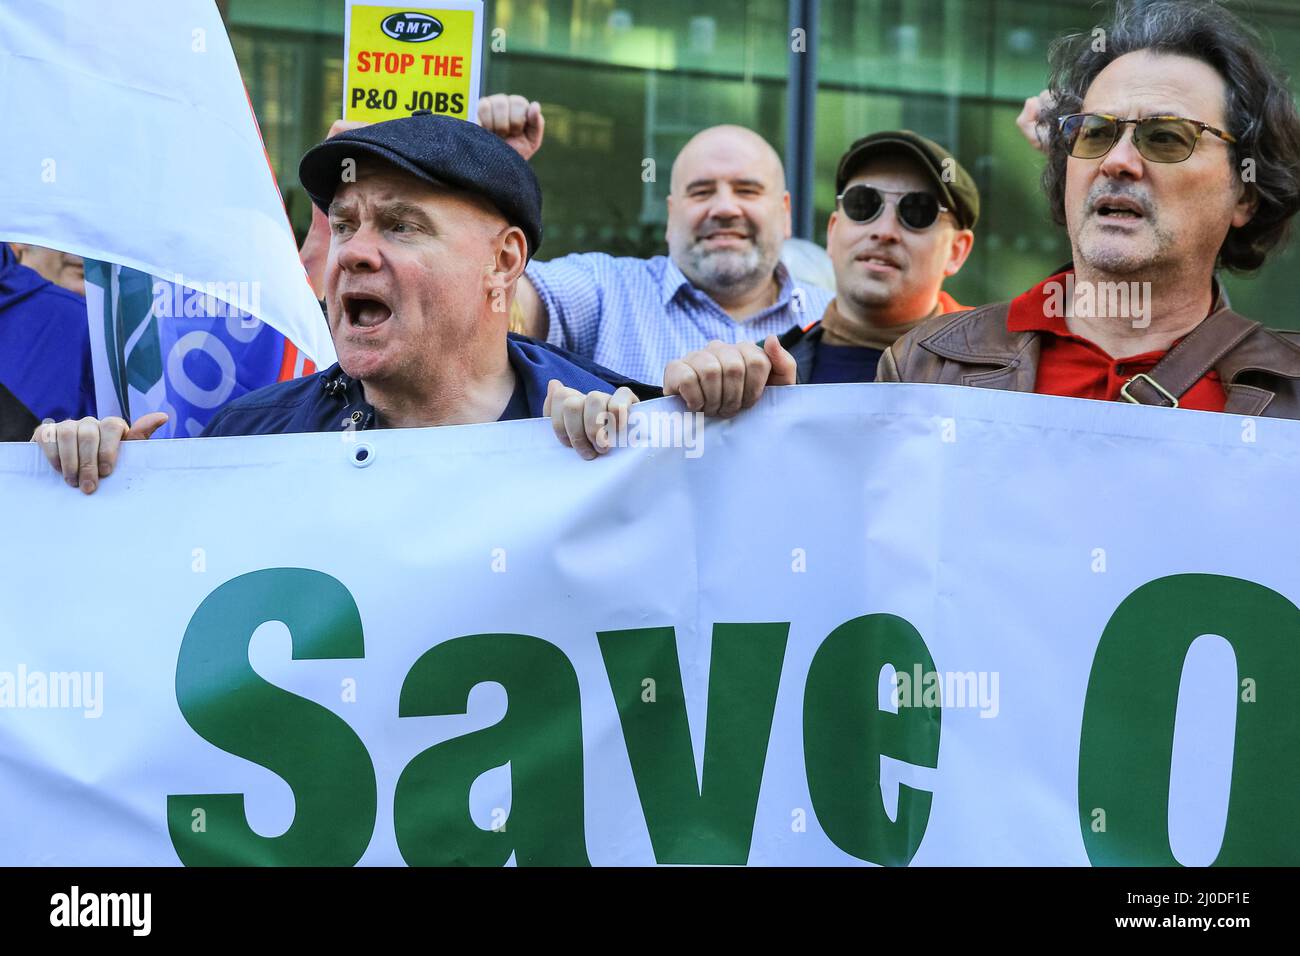 London, UK. 18th Mar, 2022. Protesters, many from the RMT union, rally outside the London HQ of P&O's parent company, DP World, against the firing of around 800 P&O Ferries staff without notice. Credit: Imageplotter/Alamy Live News Stock Photo